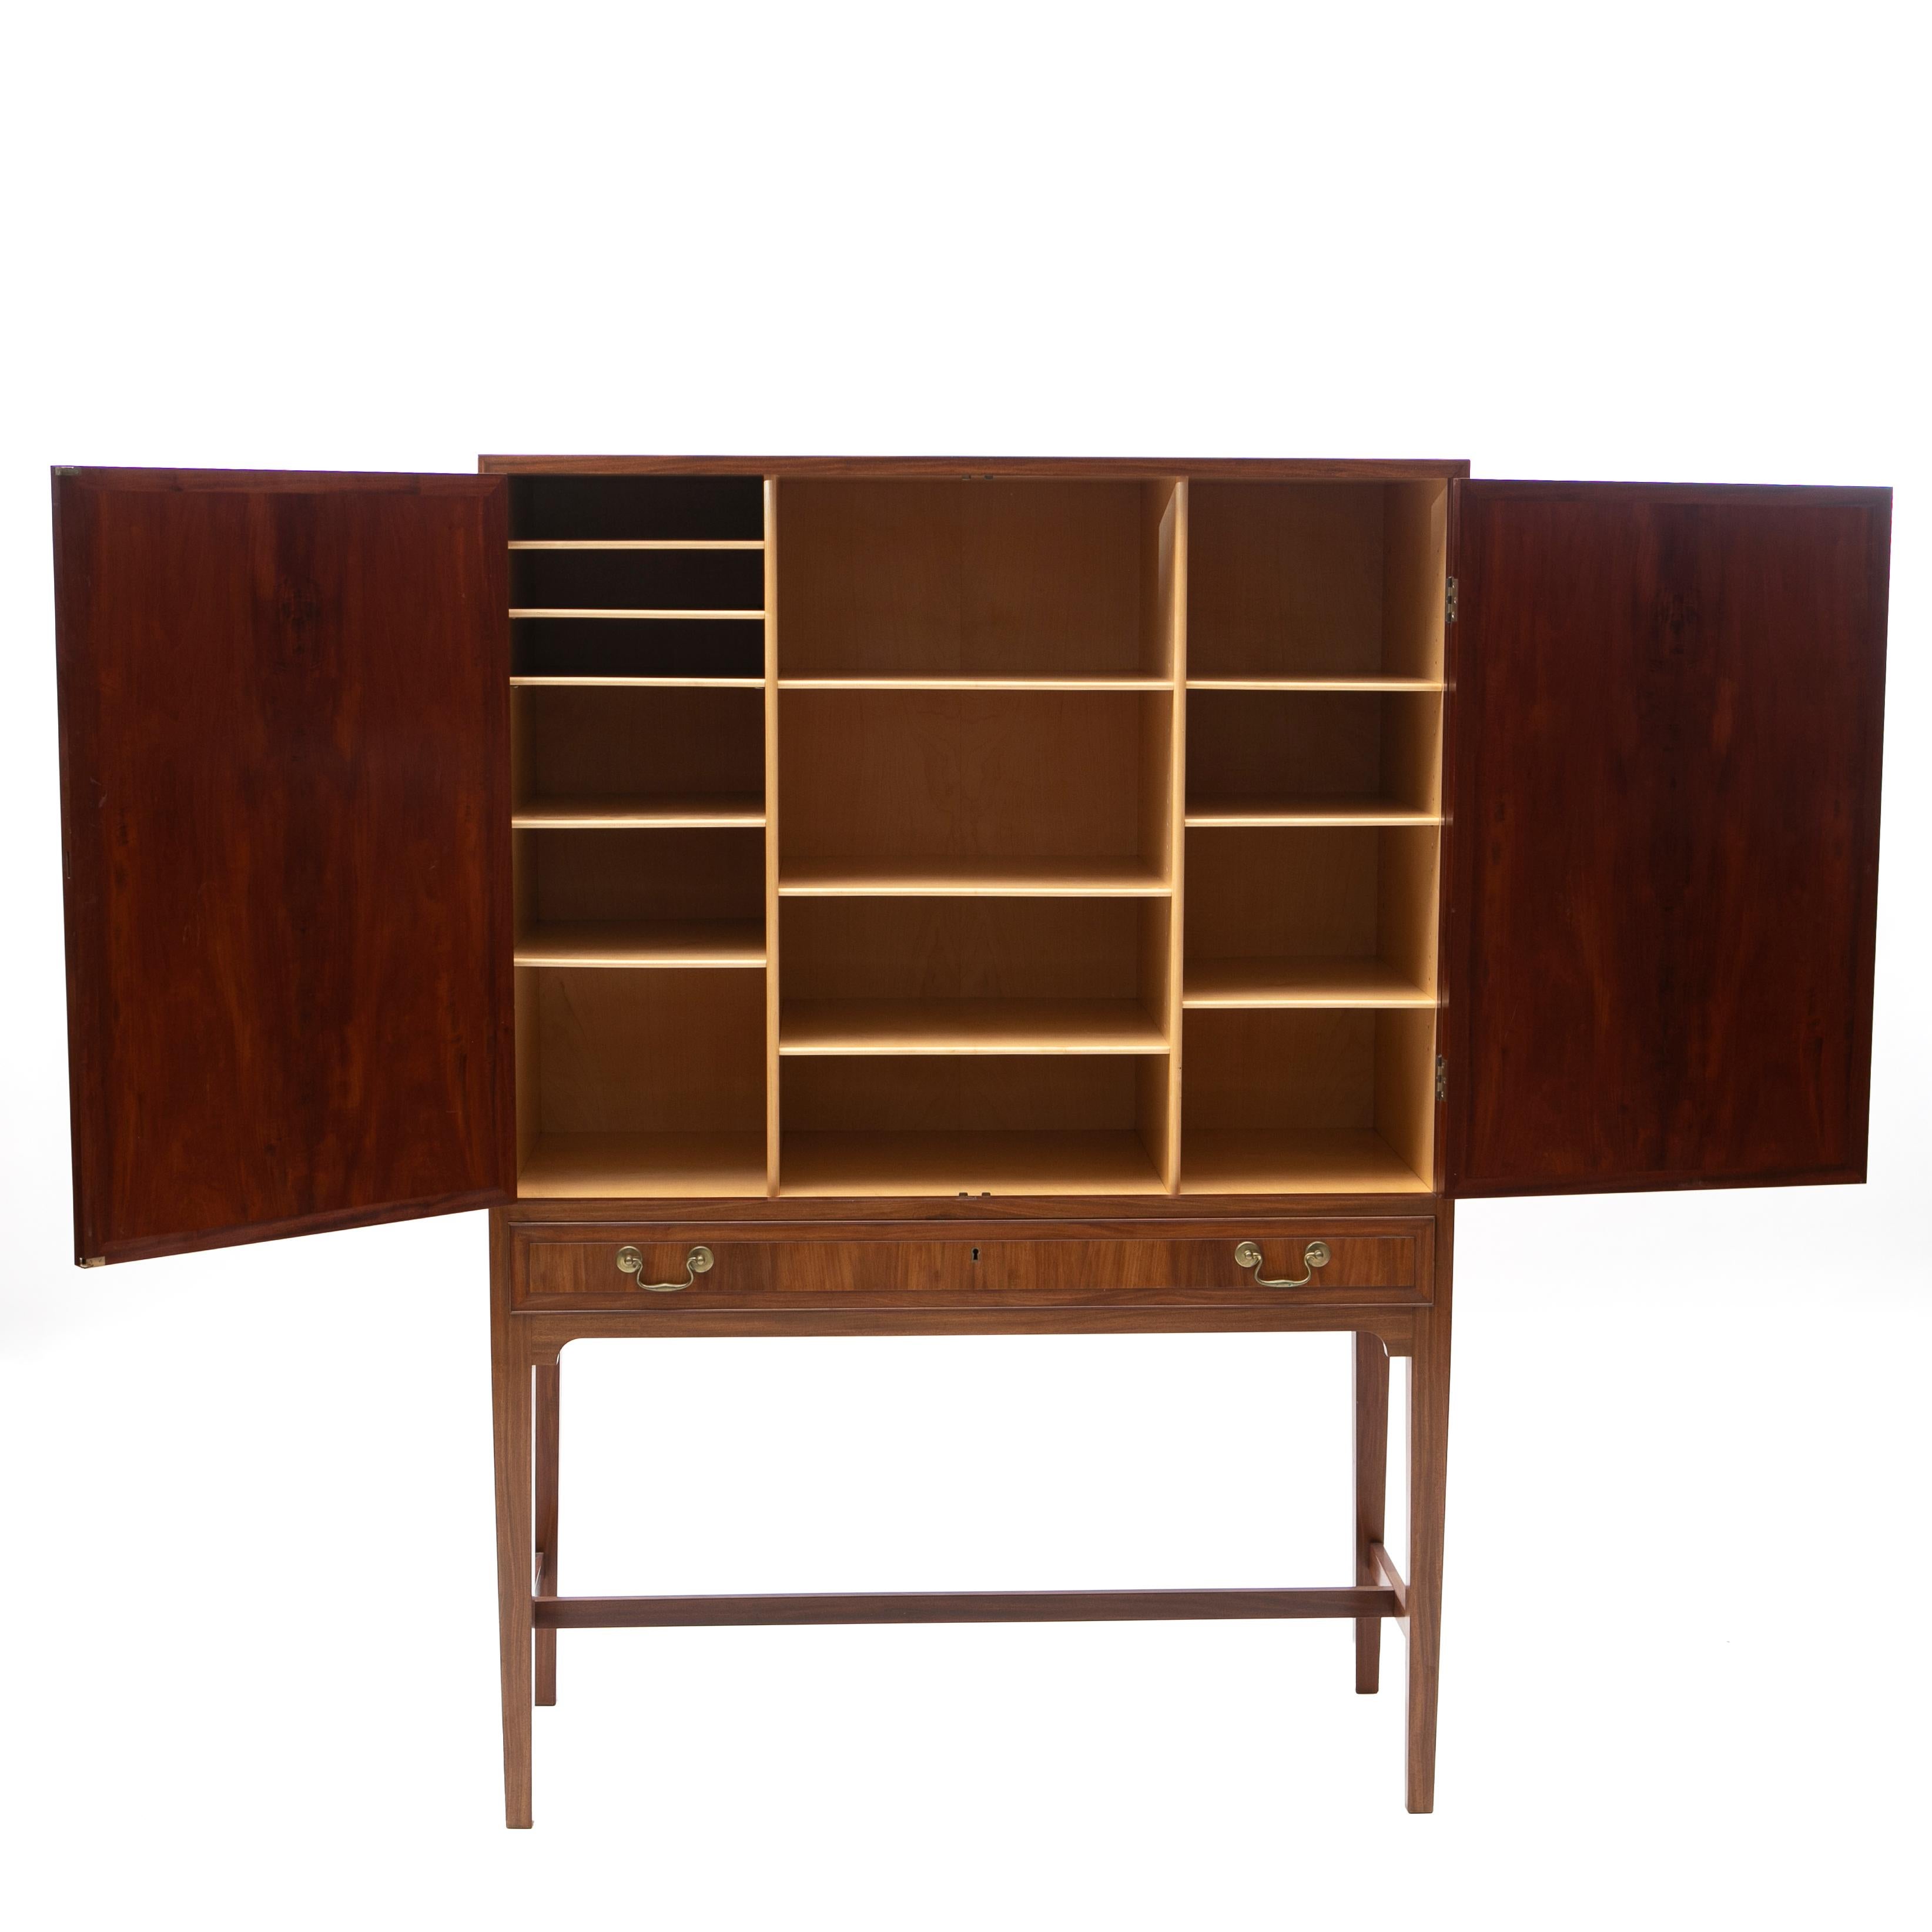 acob Kjaer (Danish, 1896-1957).
Beautiful and rare linen cabinet / cupboard in beautiful flamed Cuba mahogany with contrasting maple interior. Ultra elegant proportions matched with super high end craftsmanship.
Features a pair of doors that opens